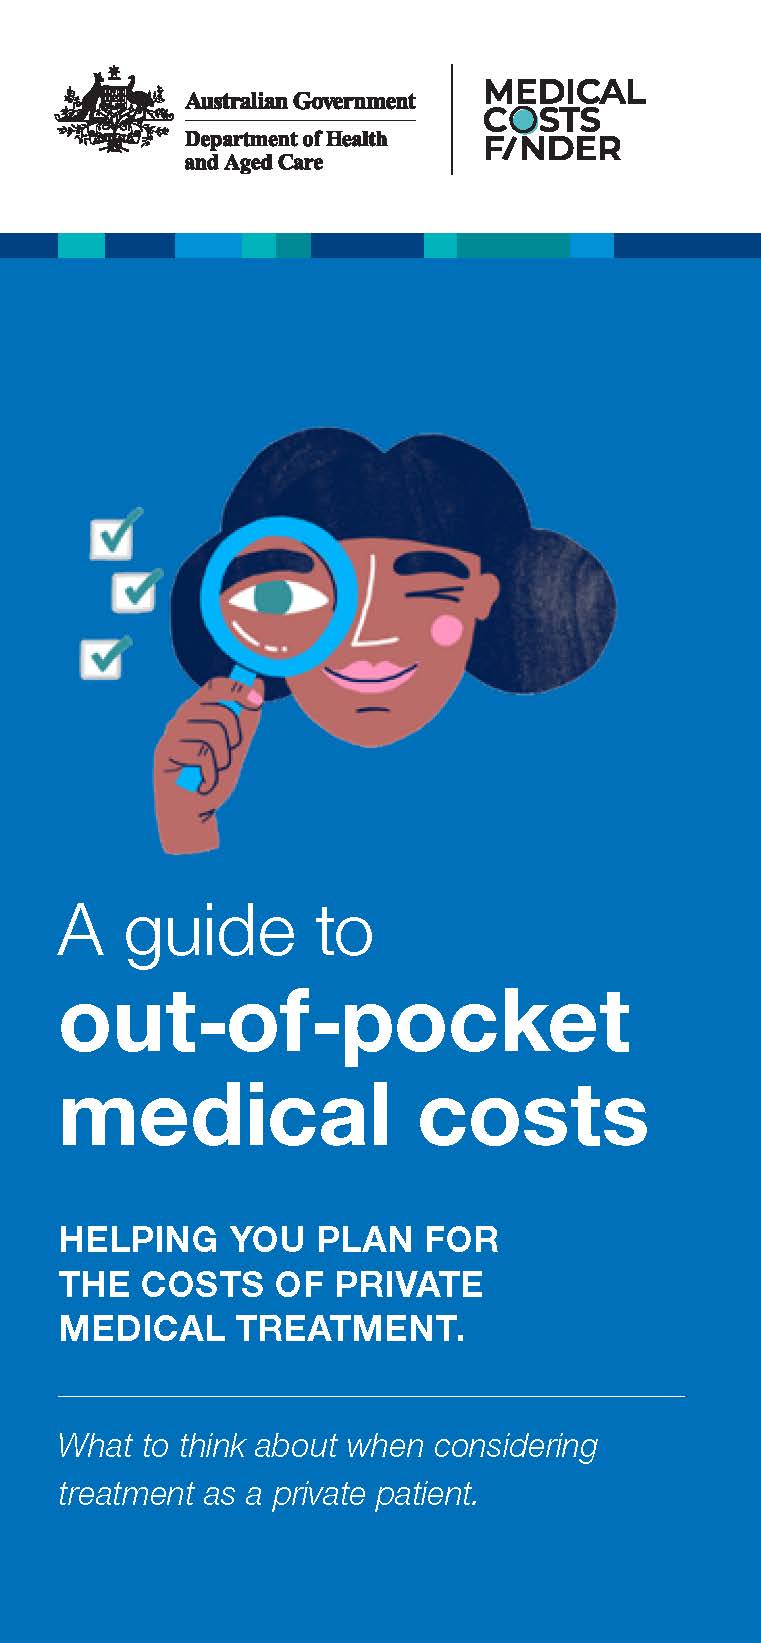 A guide to out-of-pocket medical costs – helping you plan for the cost of medical treatment